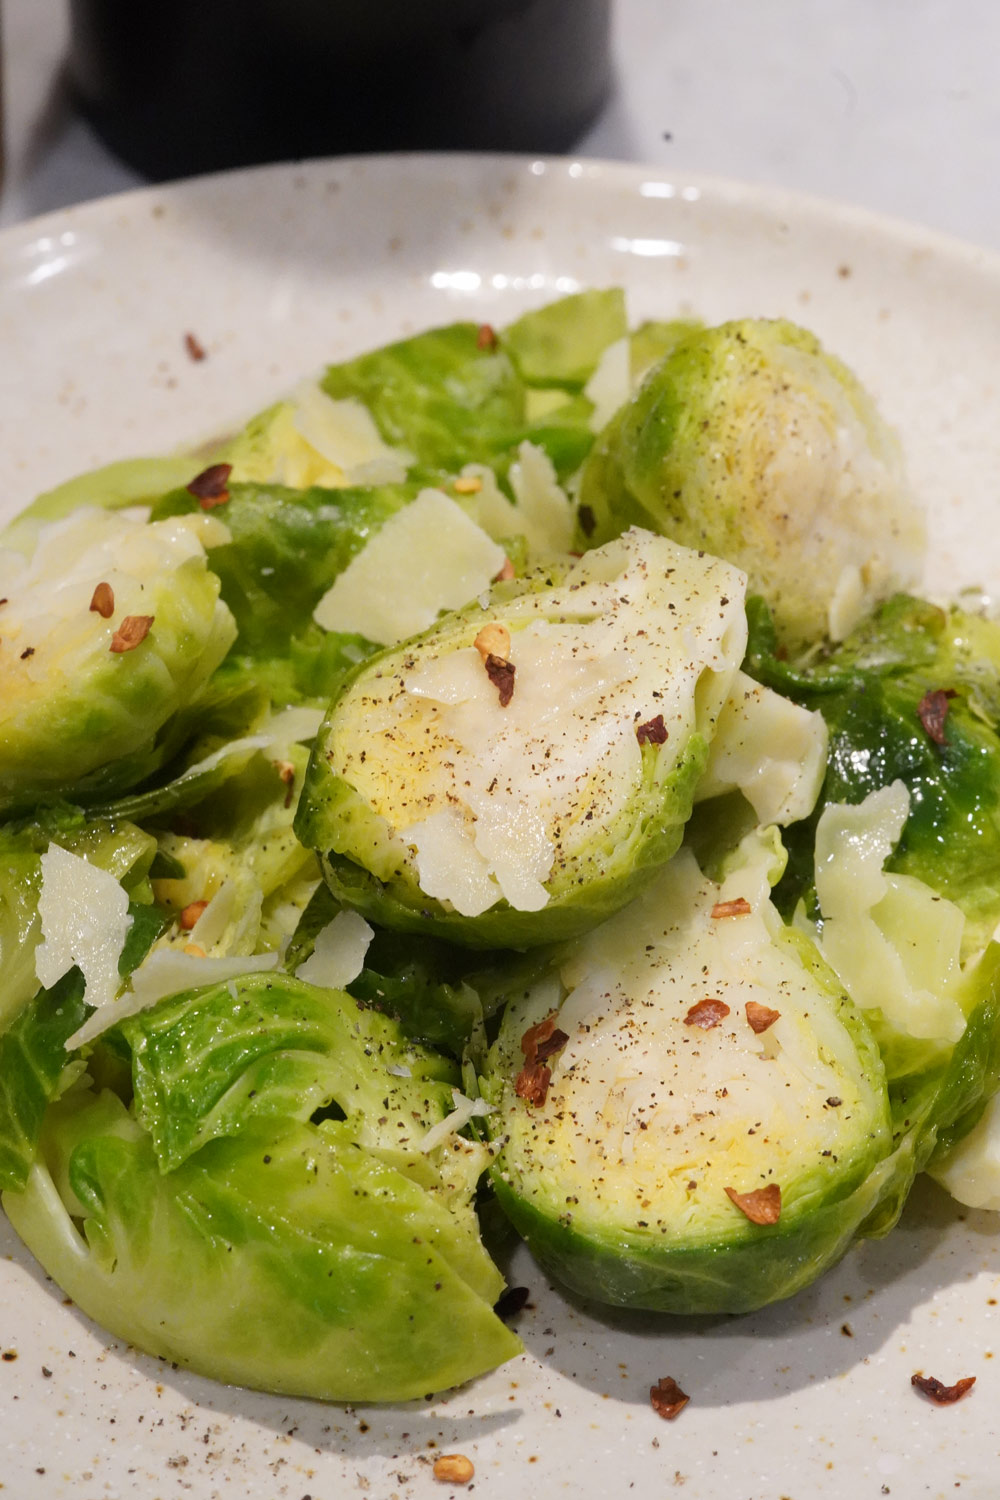 Steamed Brussels sprouts on a plate